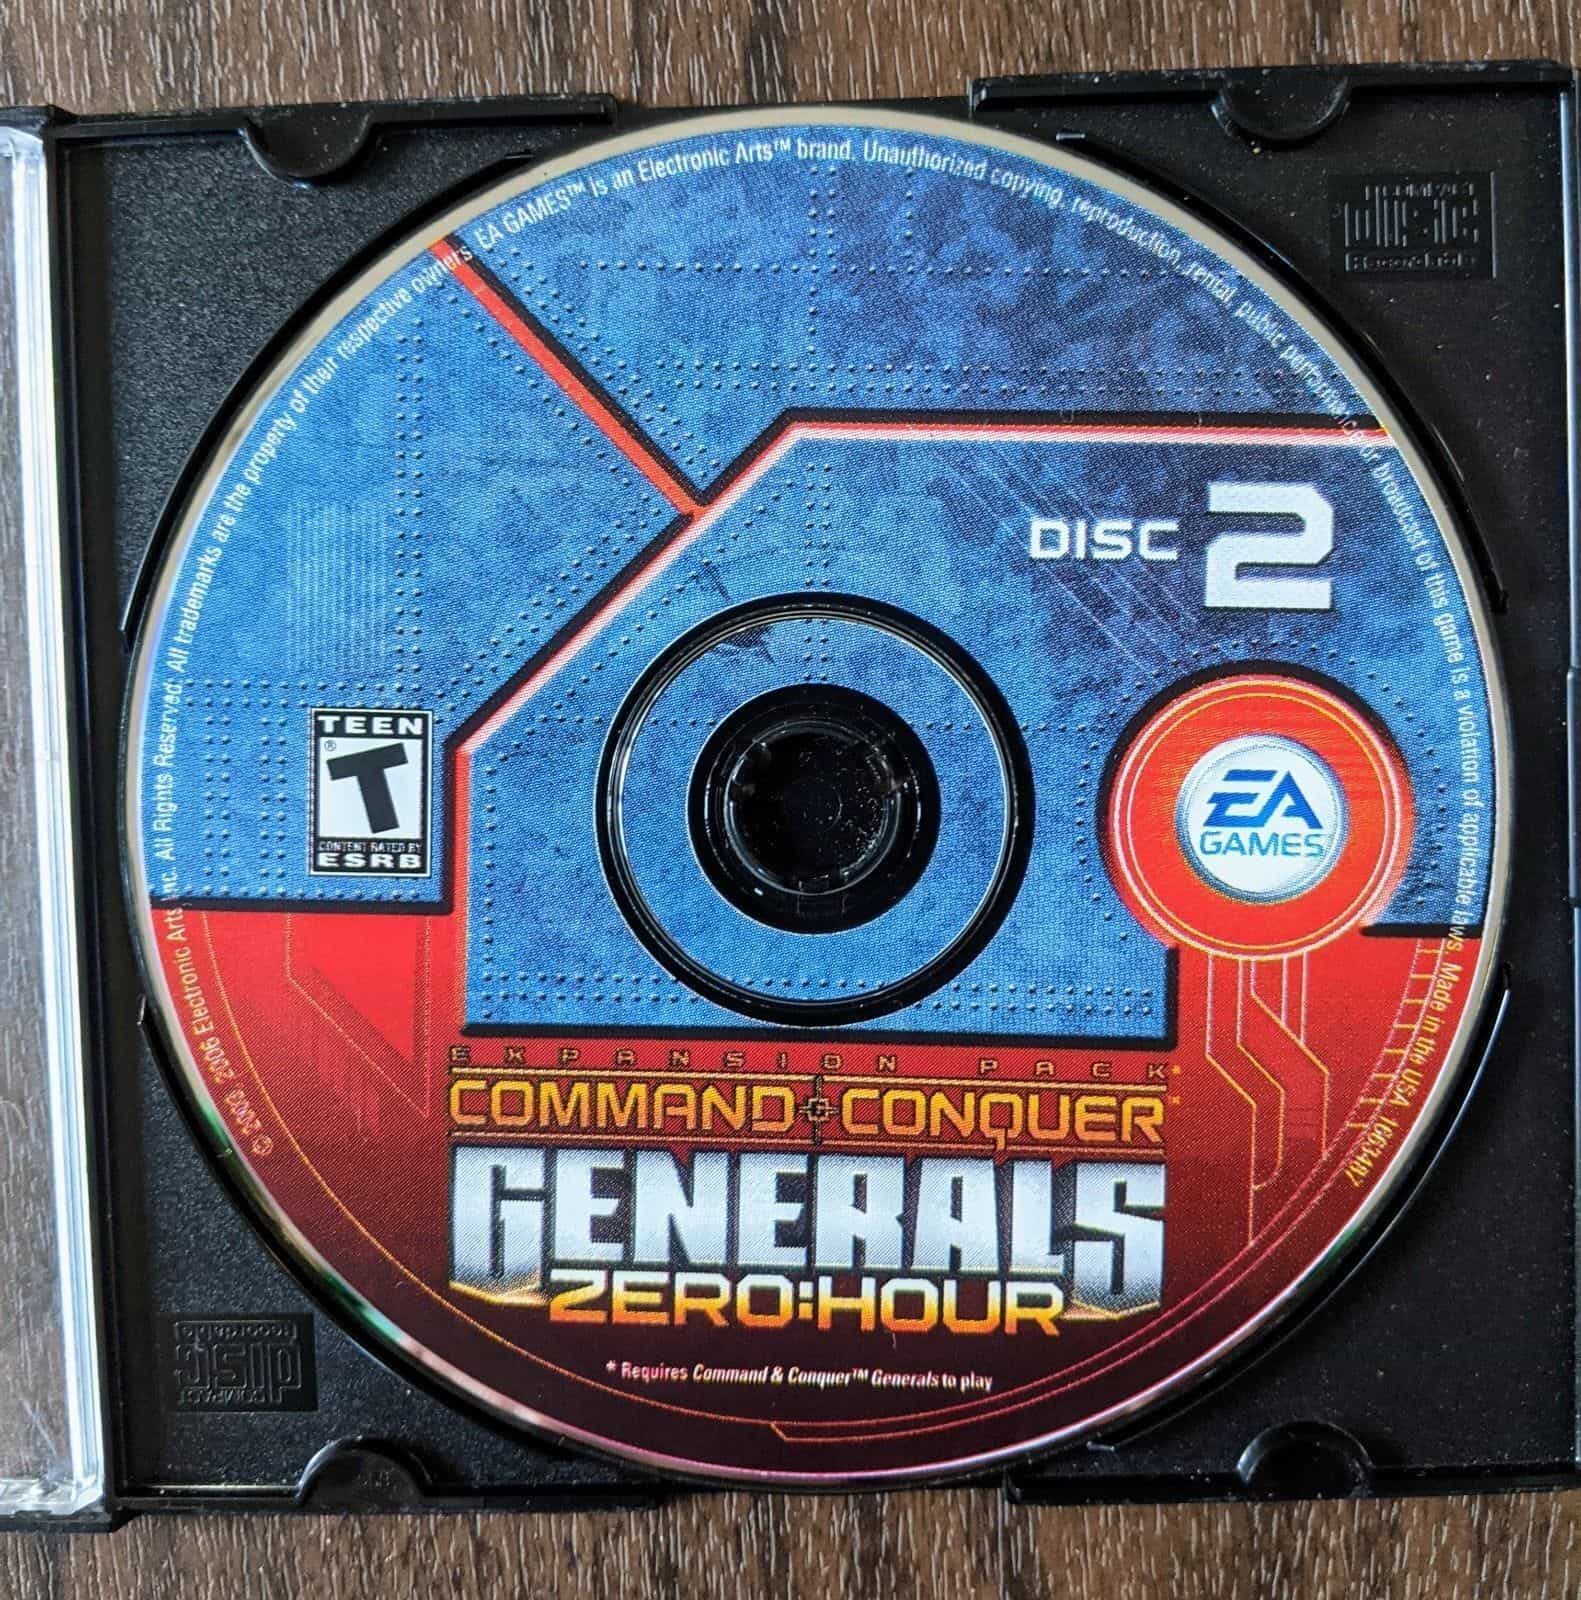 Command & Conquer Generals Zero Hour Disc 2 PC Game Disc Replacement